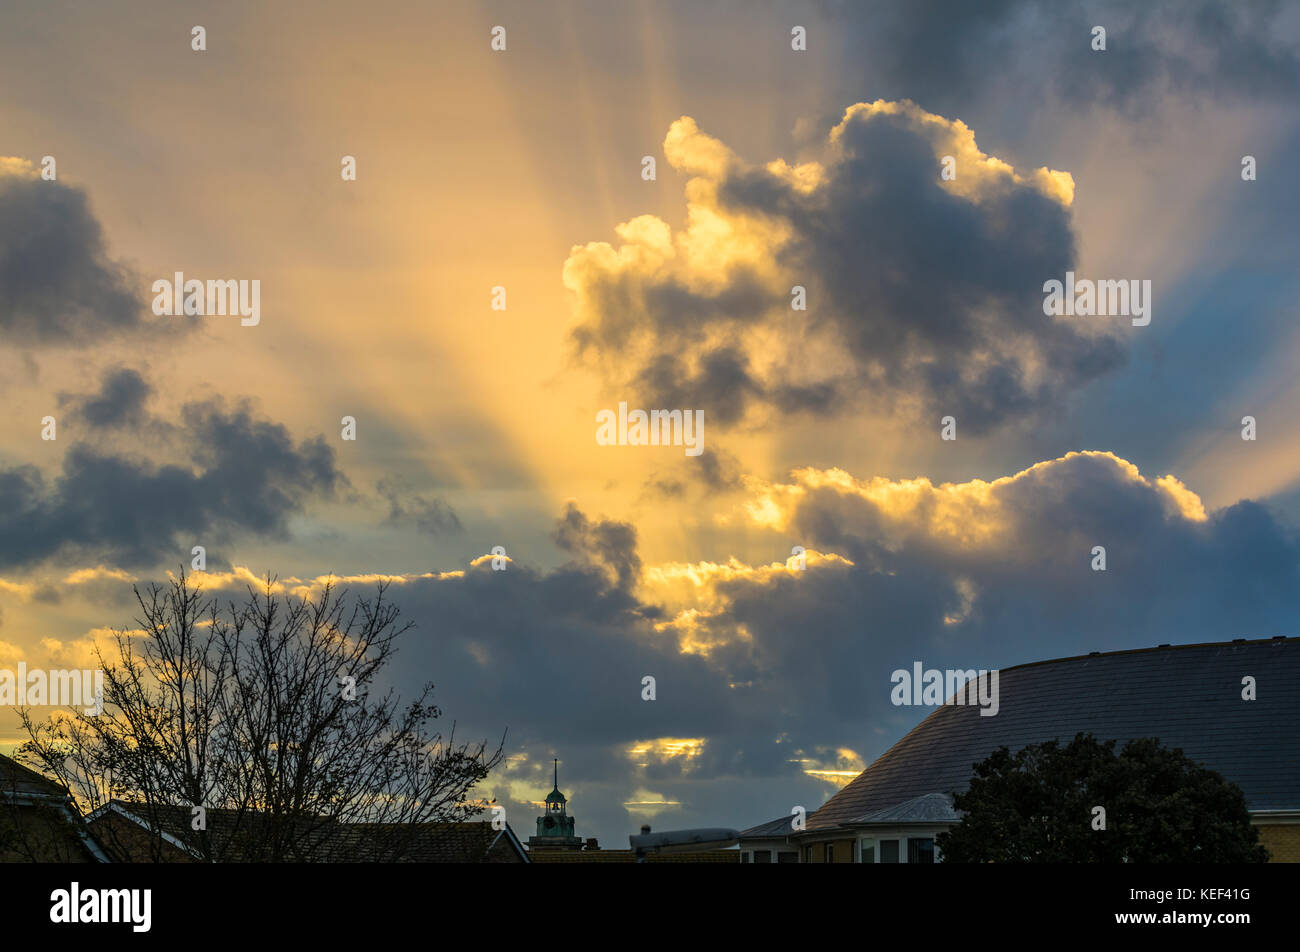 Sun going down behind clouds with suns rays visible on a cloudy evening. Stock Photo